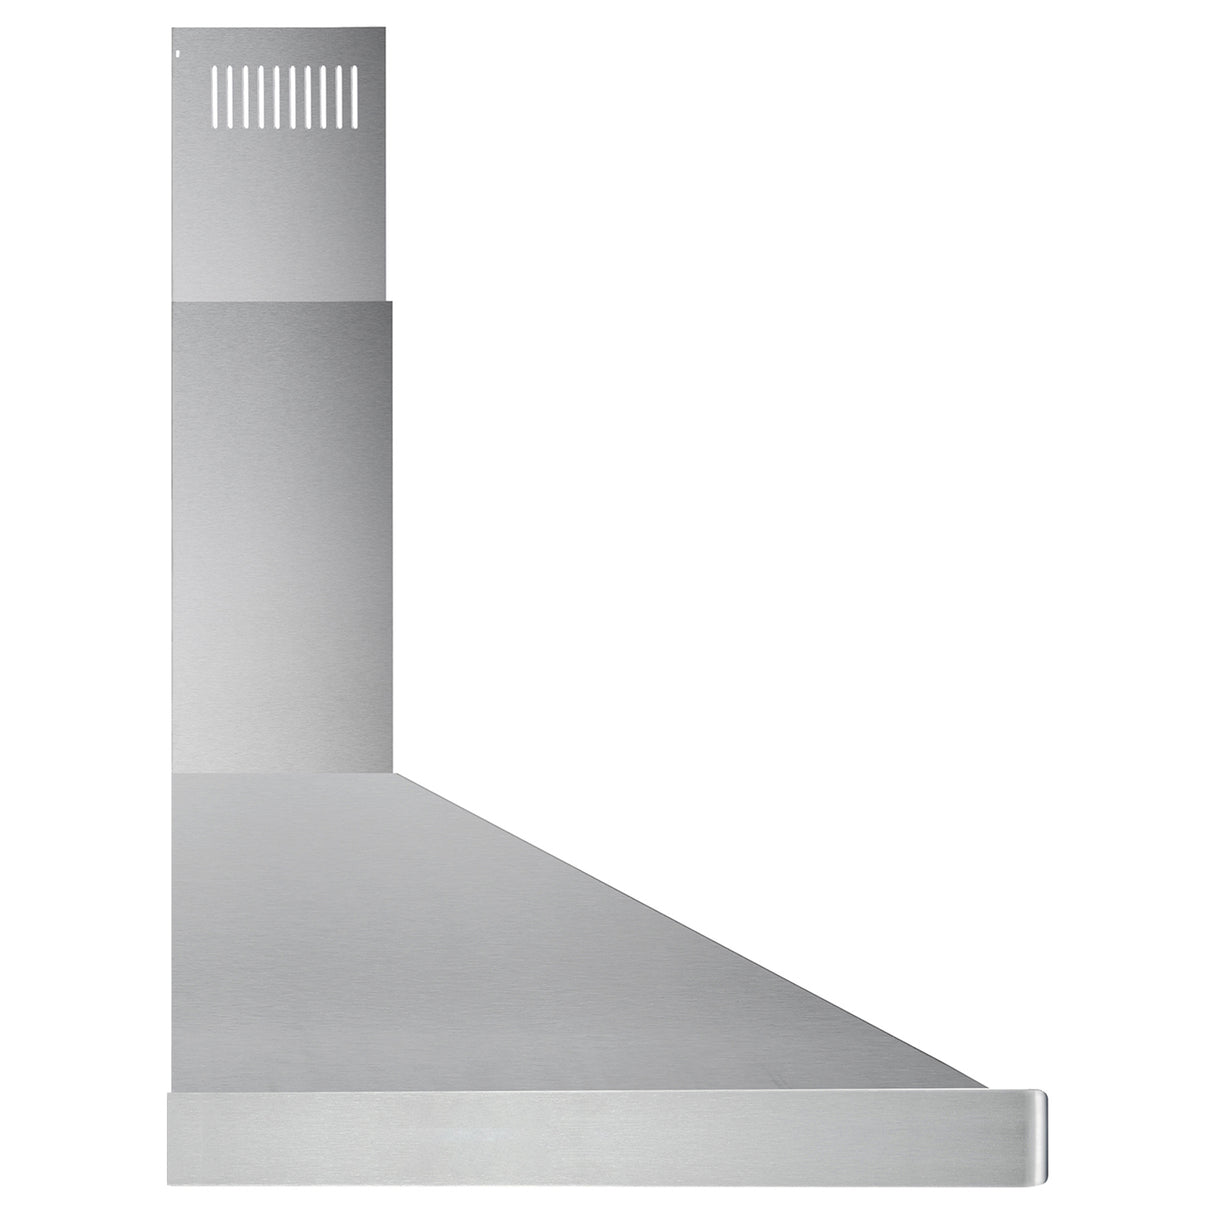 Cosmo 30" Ducted Wall Mount Range Hood in Stainless Steel with LED Lighting and Permanent Filters